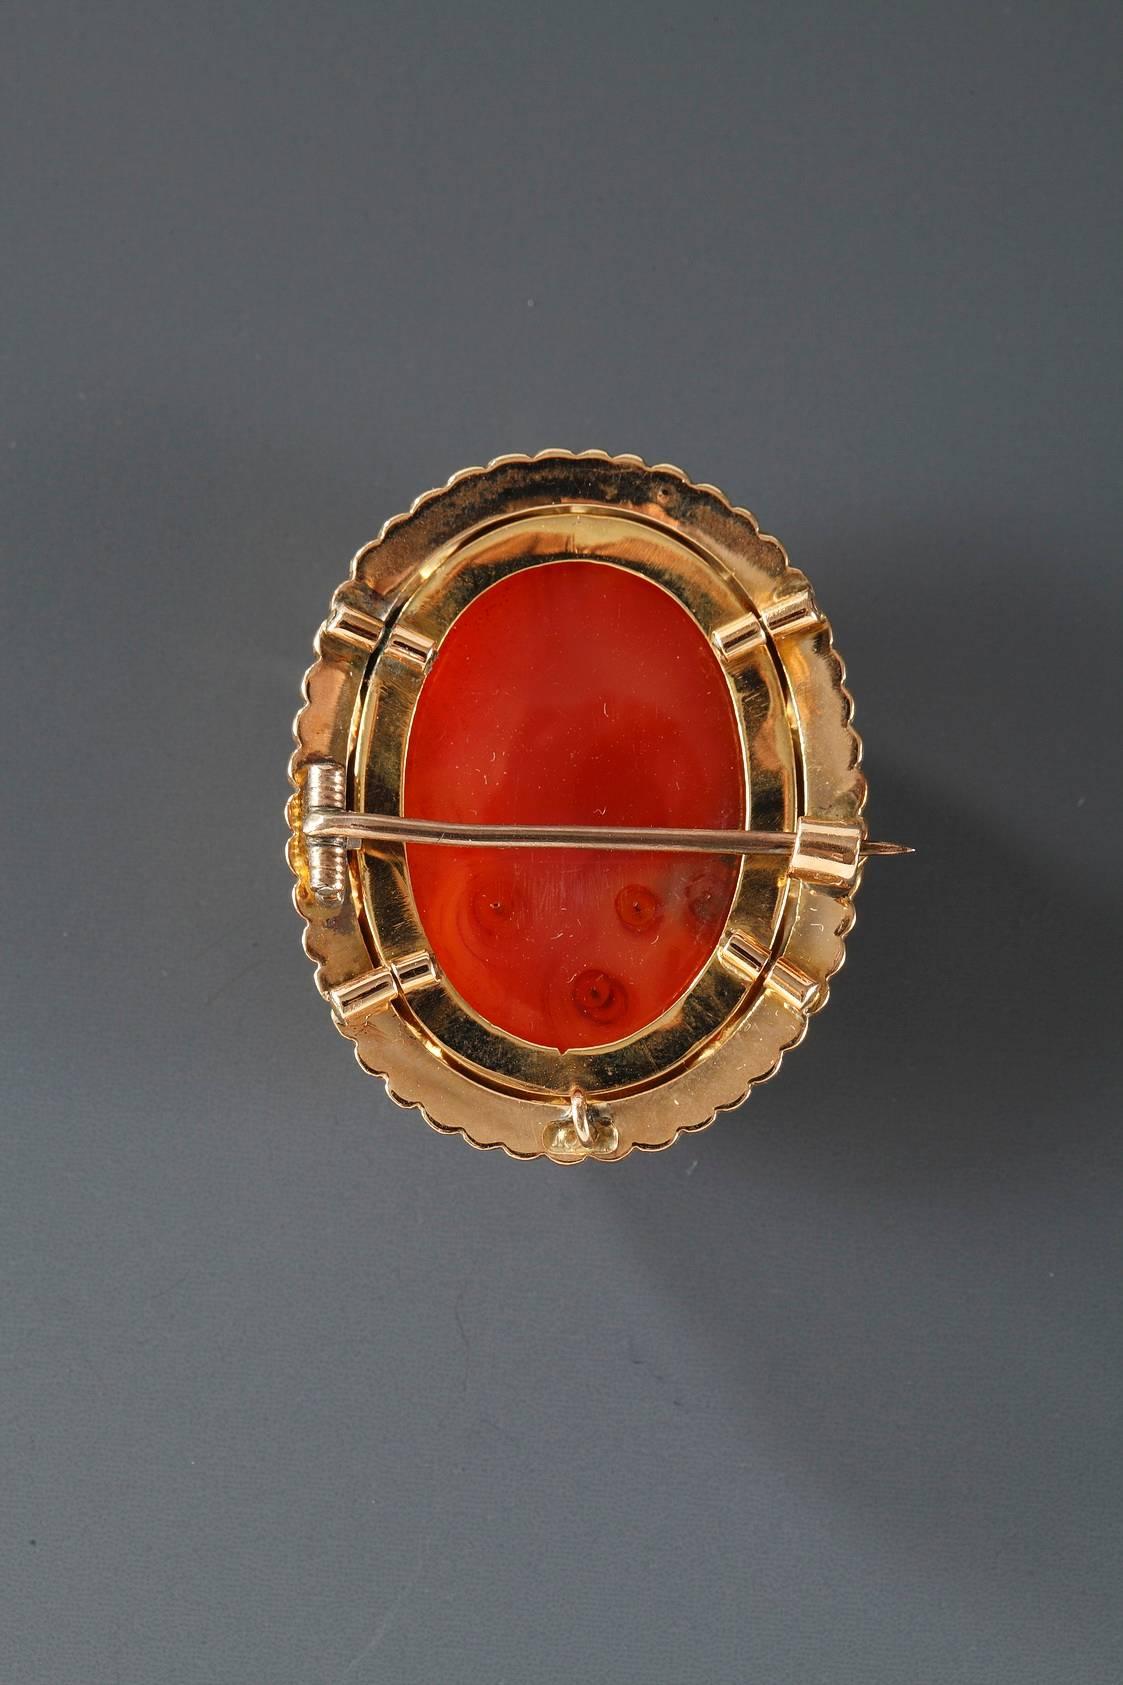 19th century agate cameo brooch, set in gold mounting. It shows two busts in profile, raised in low relief on a dark red background. The gold mounting is set with a row of small pearls.
 
Circa :1860

Dim: W: 1 in – D: ,4in – H: 1,3in.
Dim: